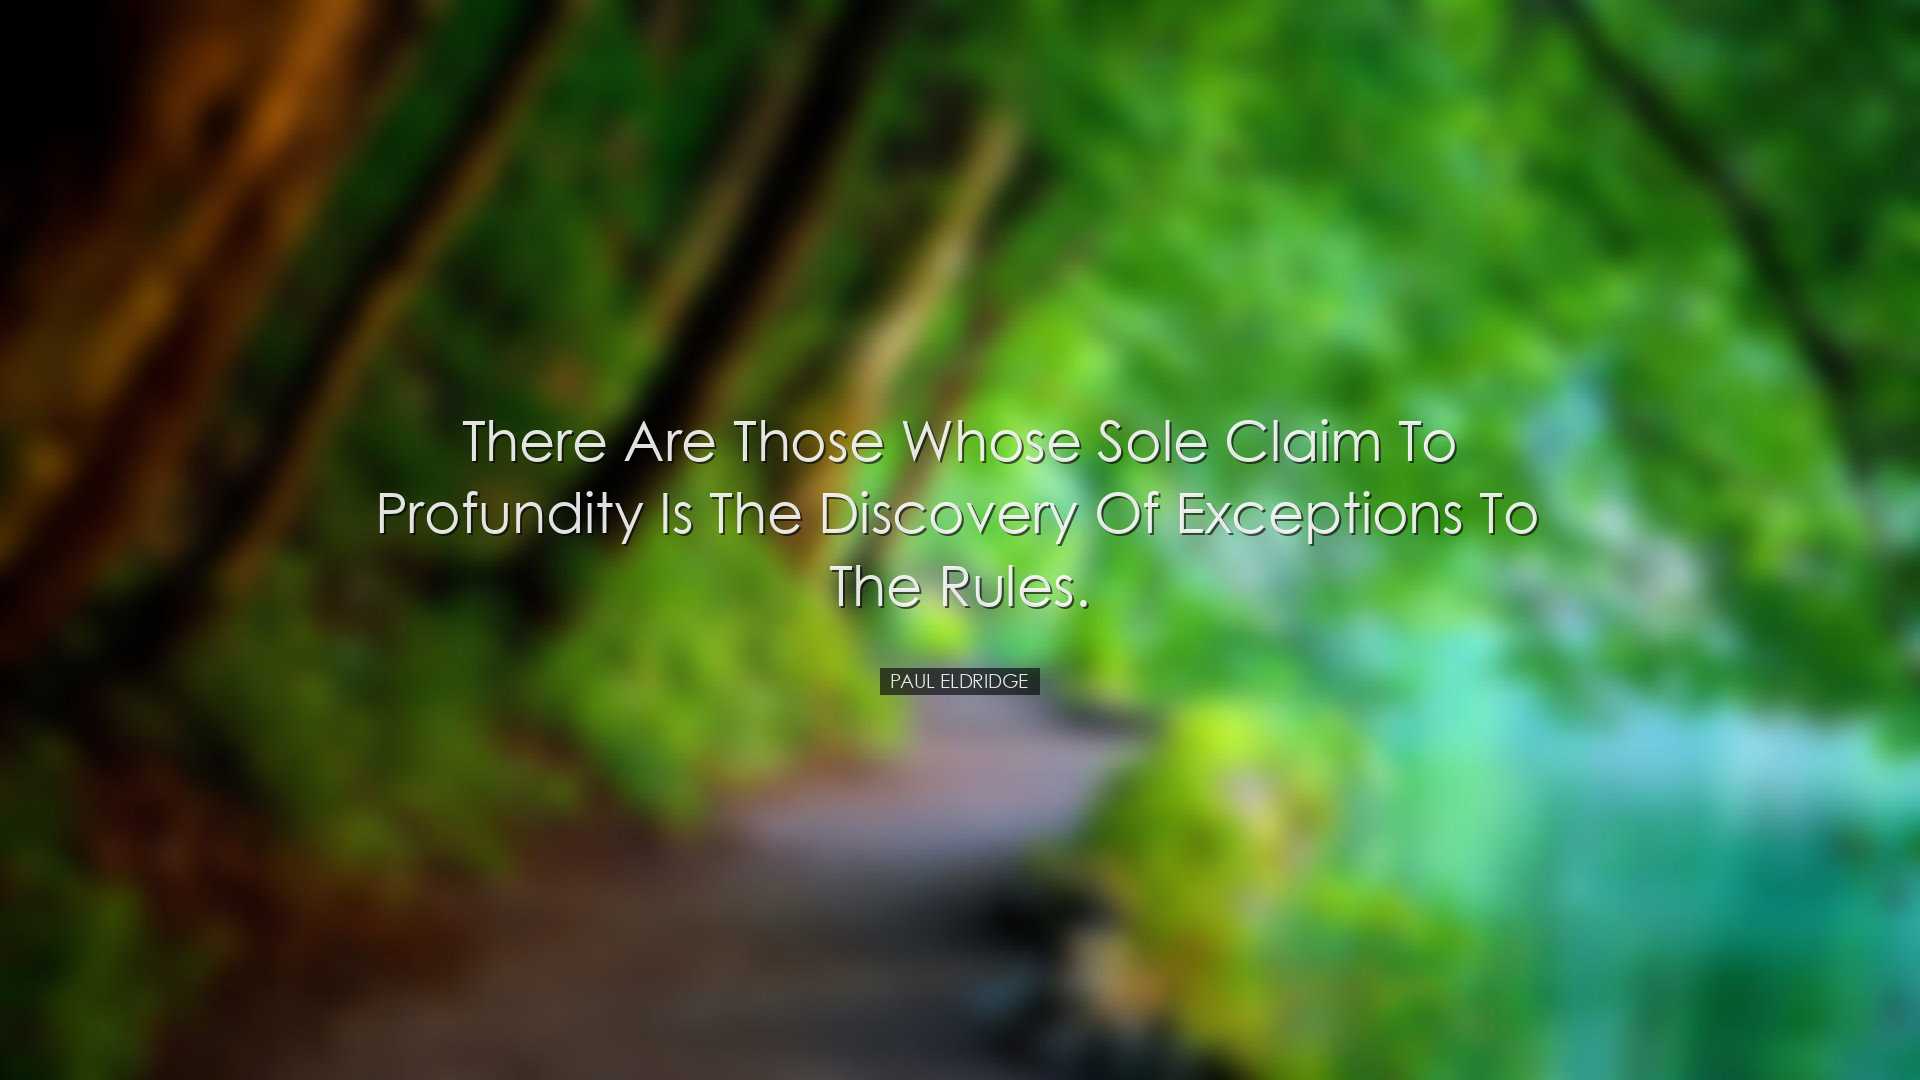 There are those whose sole claim to profundity is the discovery of